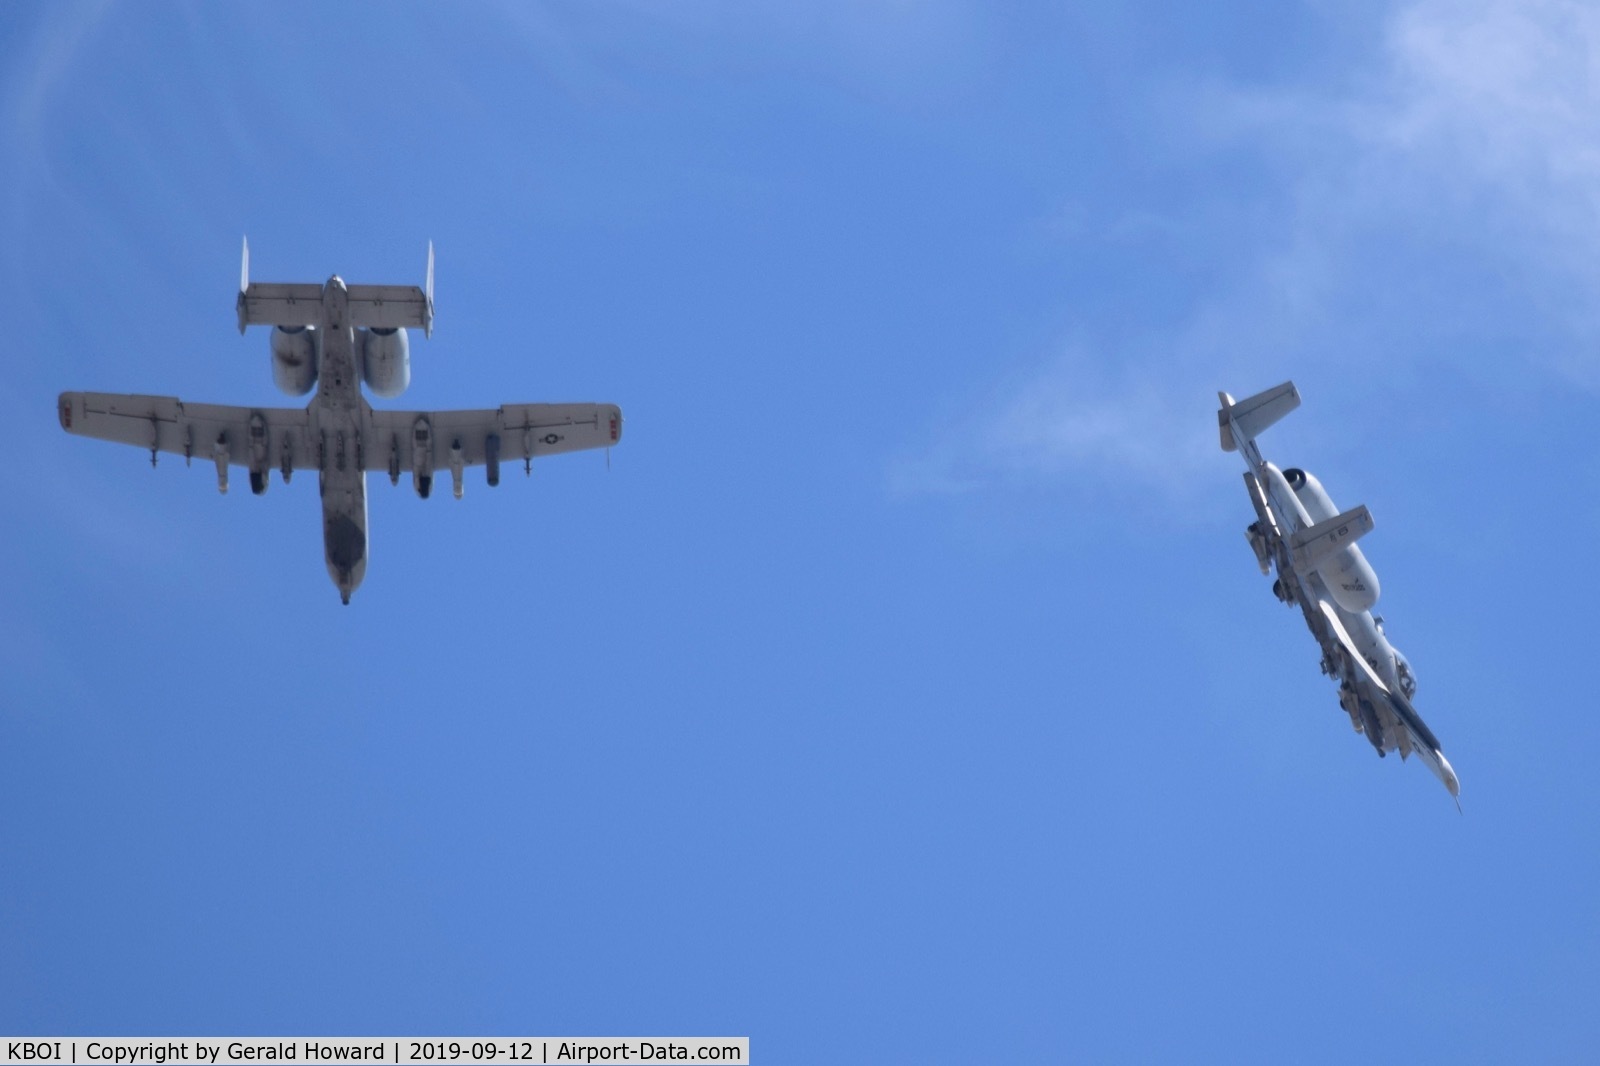 Boise Air Terminal/gowen Fld Airport (BOI) - Two A-10Cs from the Idaho ANG making the break for downwind RWY 10R.